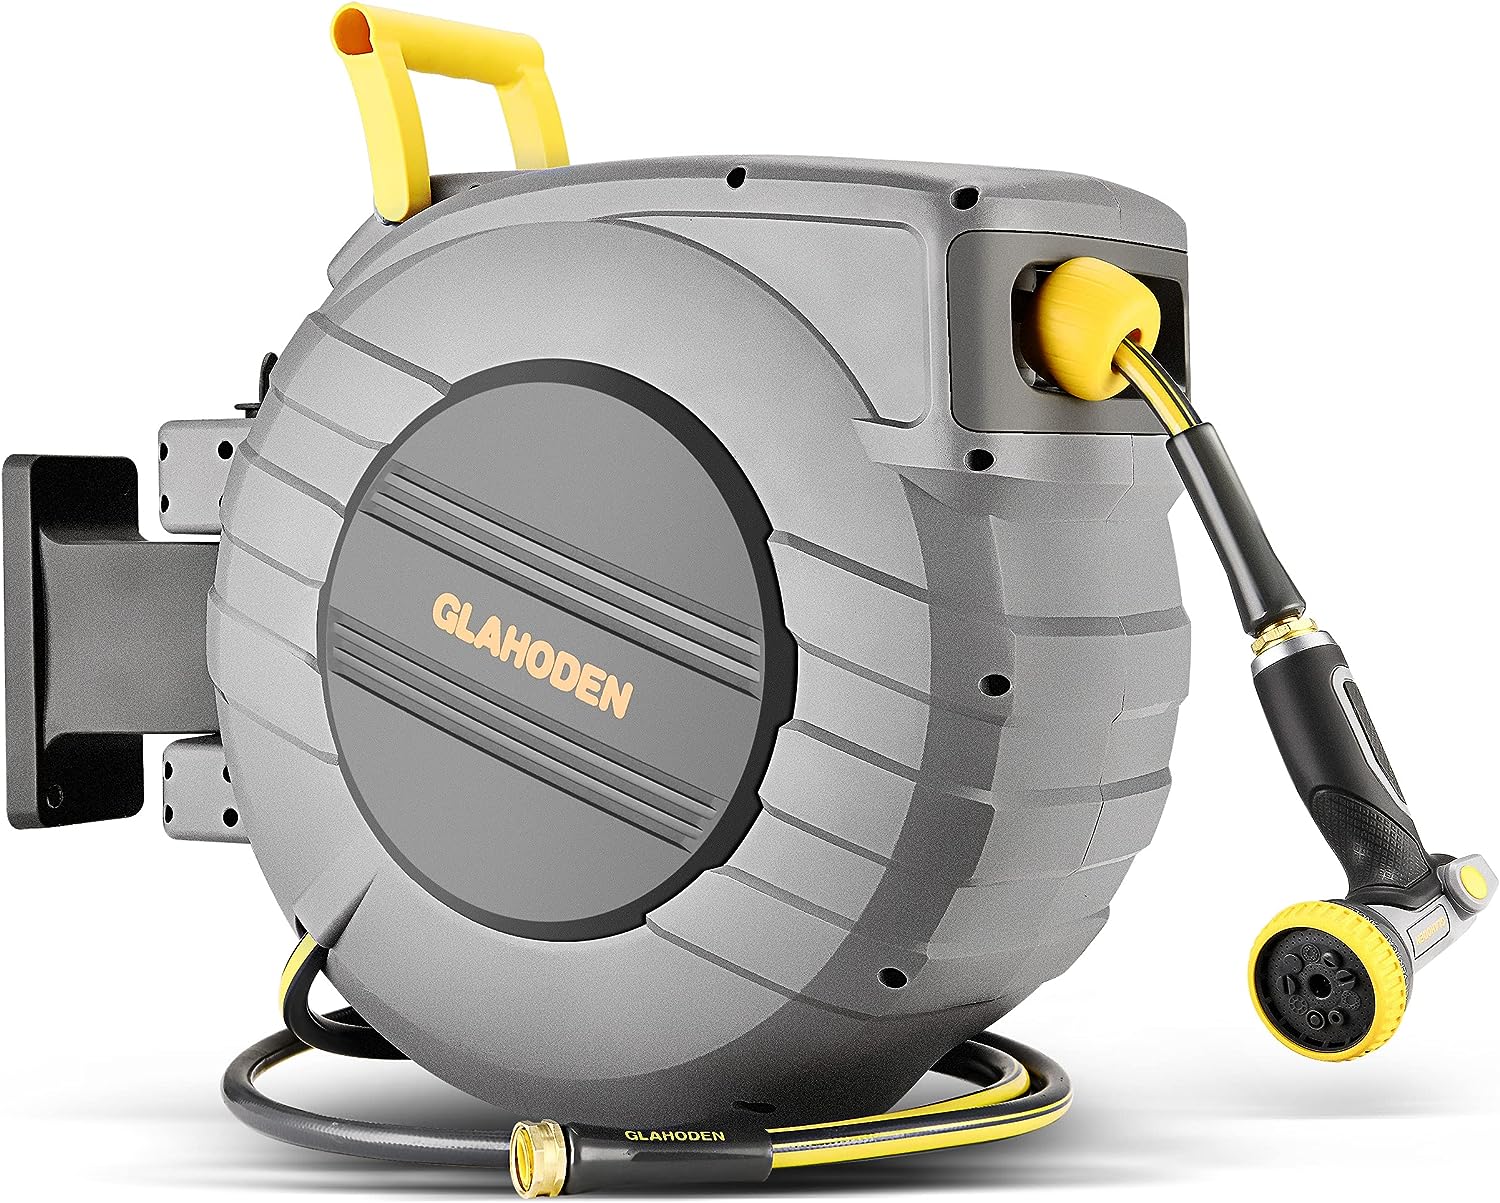 GLAHODEN Retractable Garden Hose Reel, 5/8in x 100ft+6ft 2 Year Anti-fading  Water Hose Reel, Patented Design for Any Length Lock Slow Return System